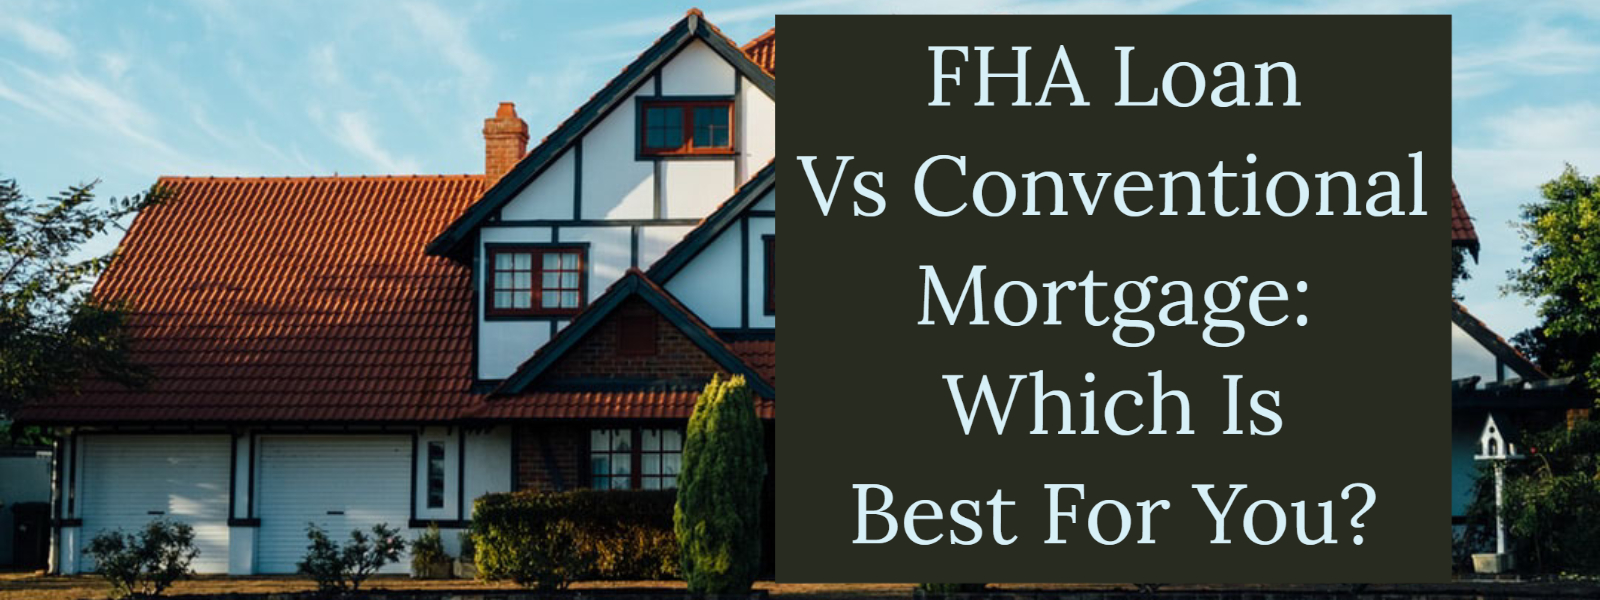 FHA Loan Vs Conventional Mortgage: Which Is Best For You?